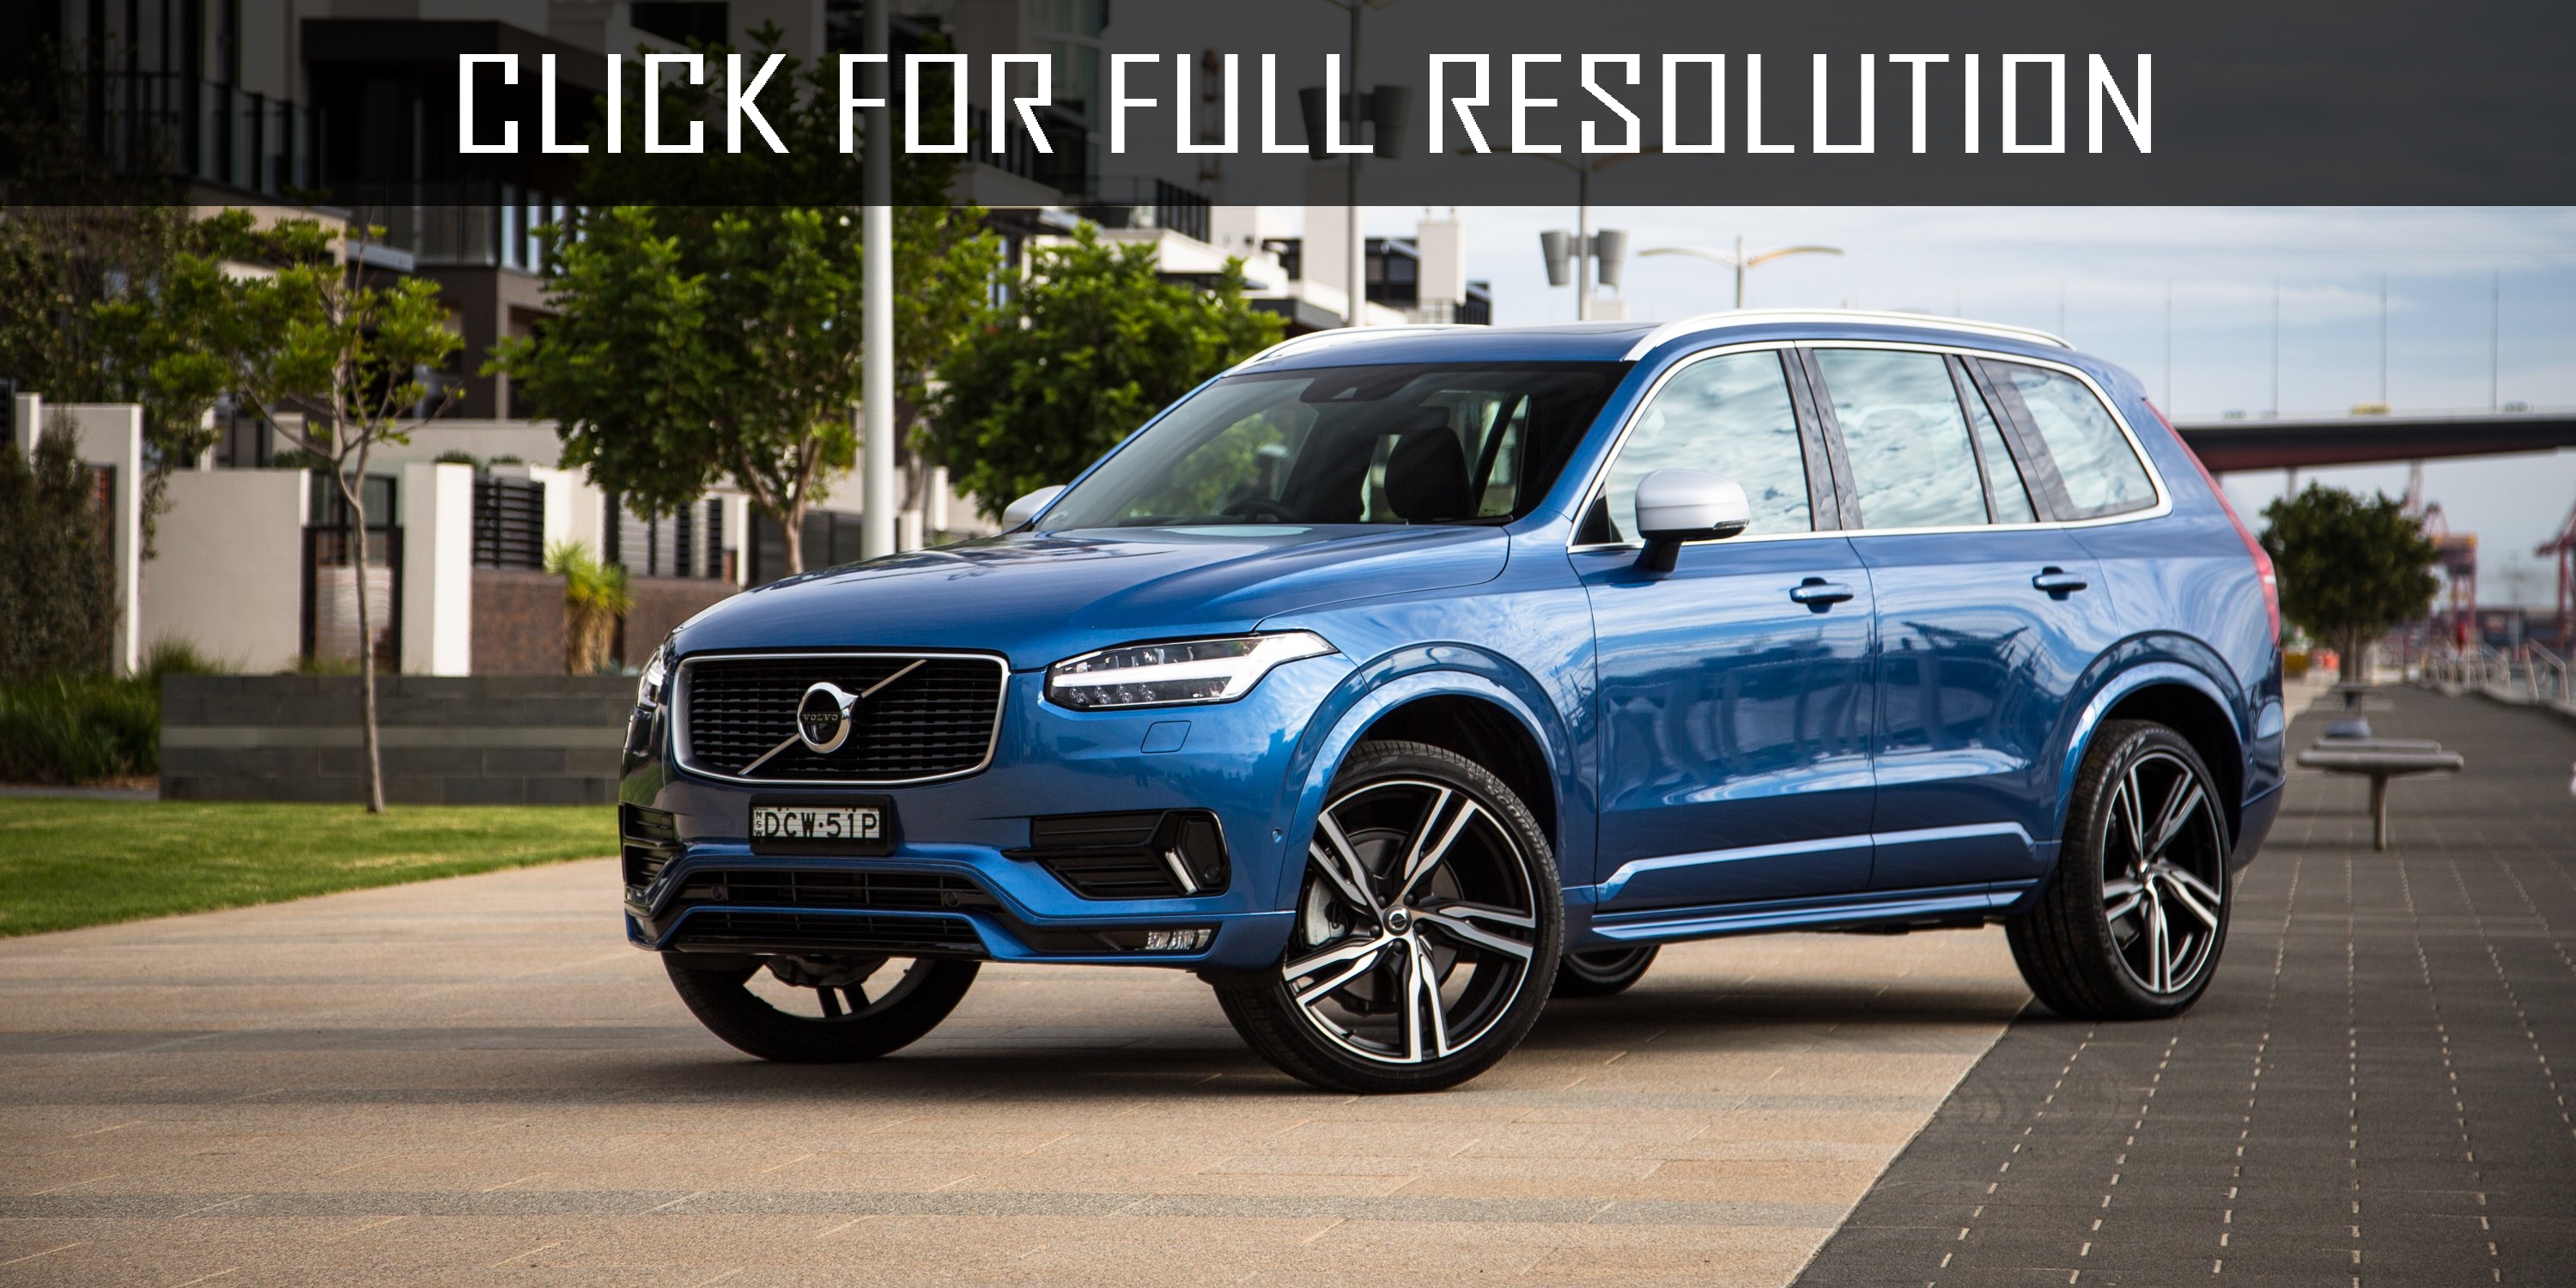 2017 Volvo Xc90 Sport news, reviews, msrp, ratings with